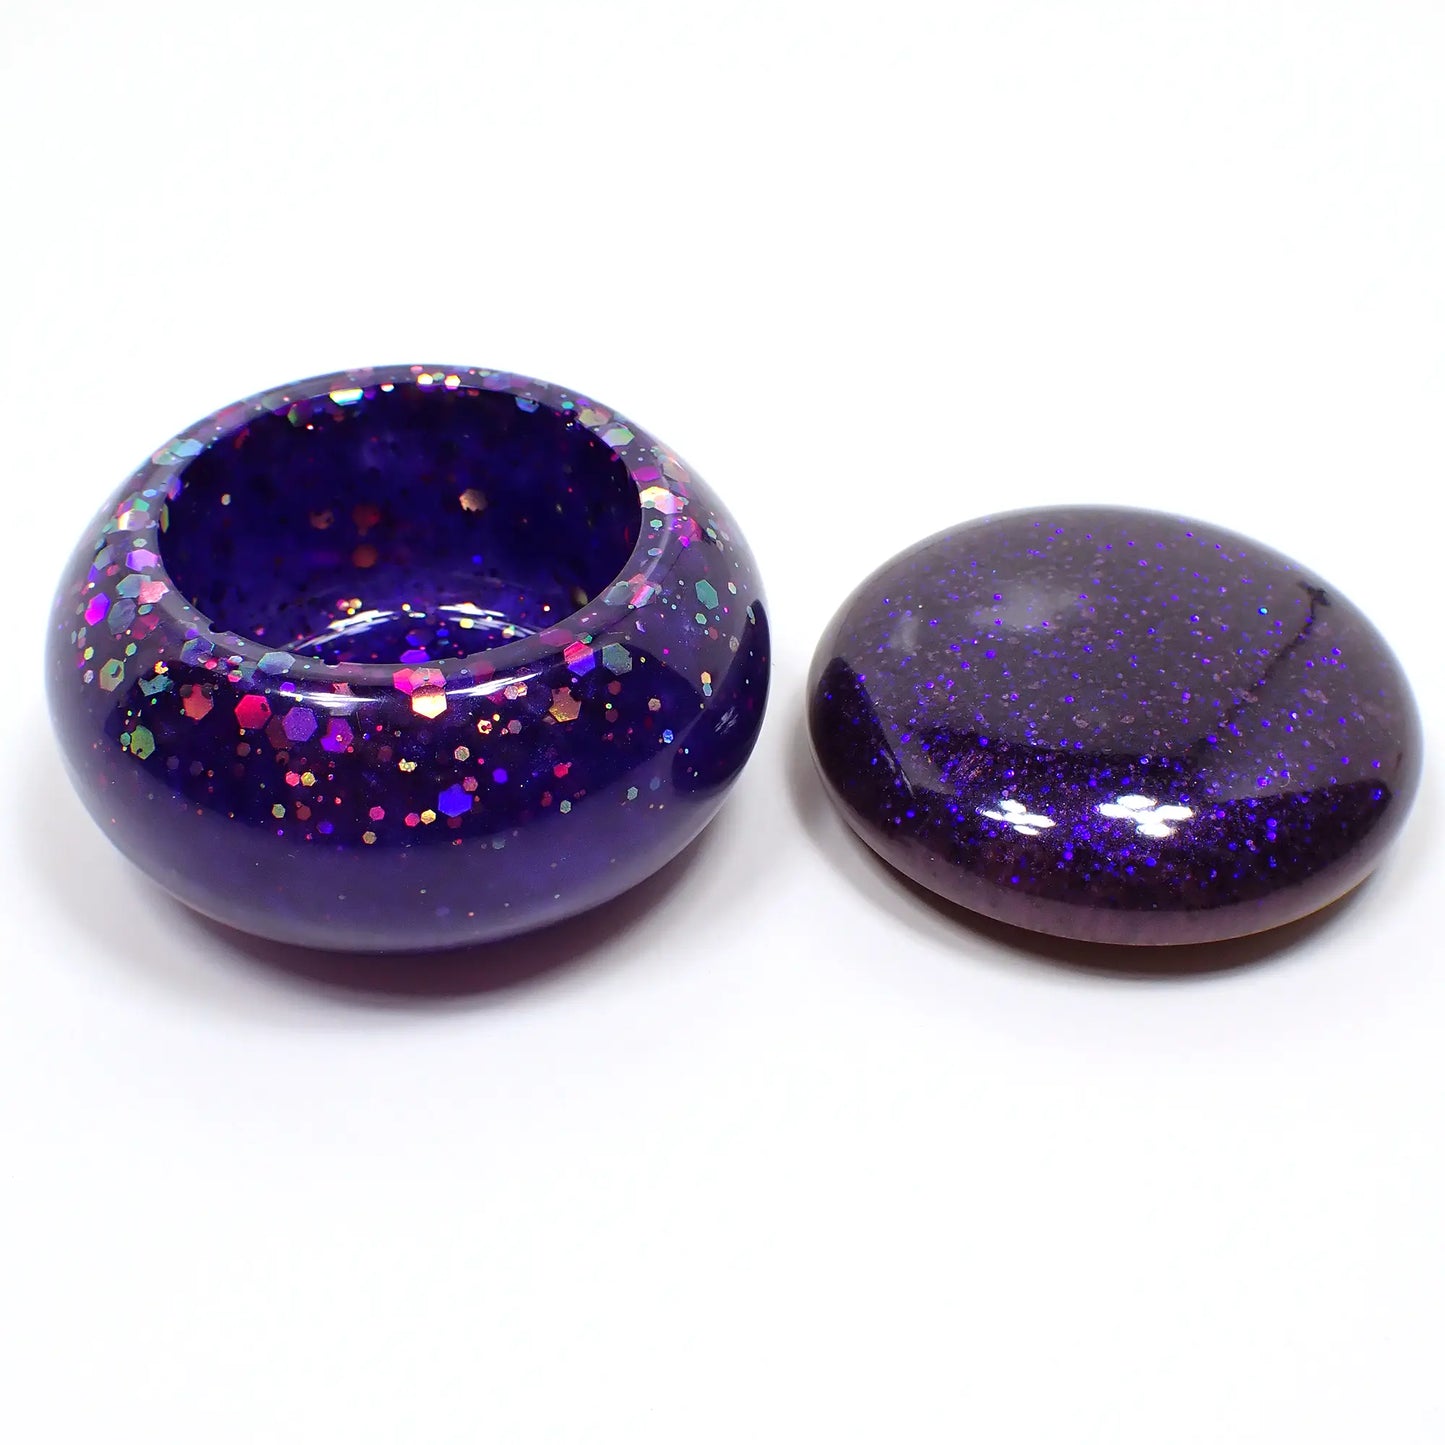 Small Pearly Purple and Blue Resin Handmade Round Trinket Box with Chunky Iridescent Glitter